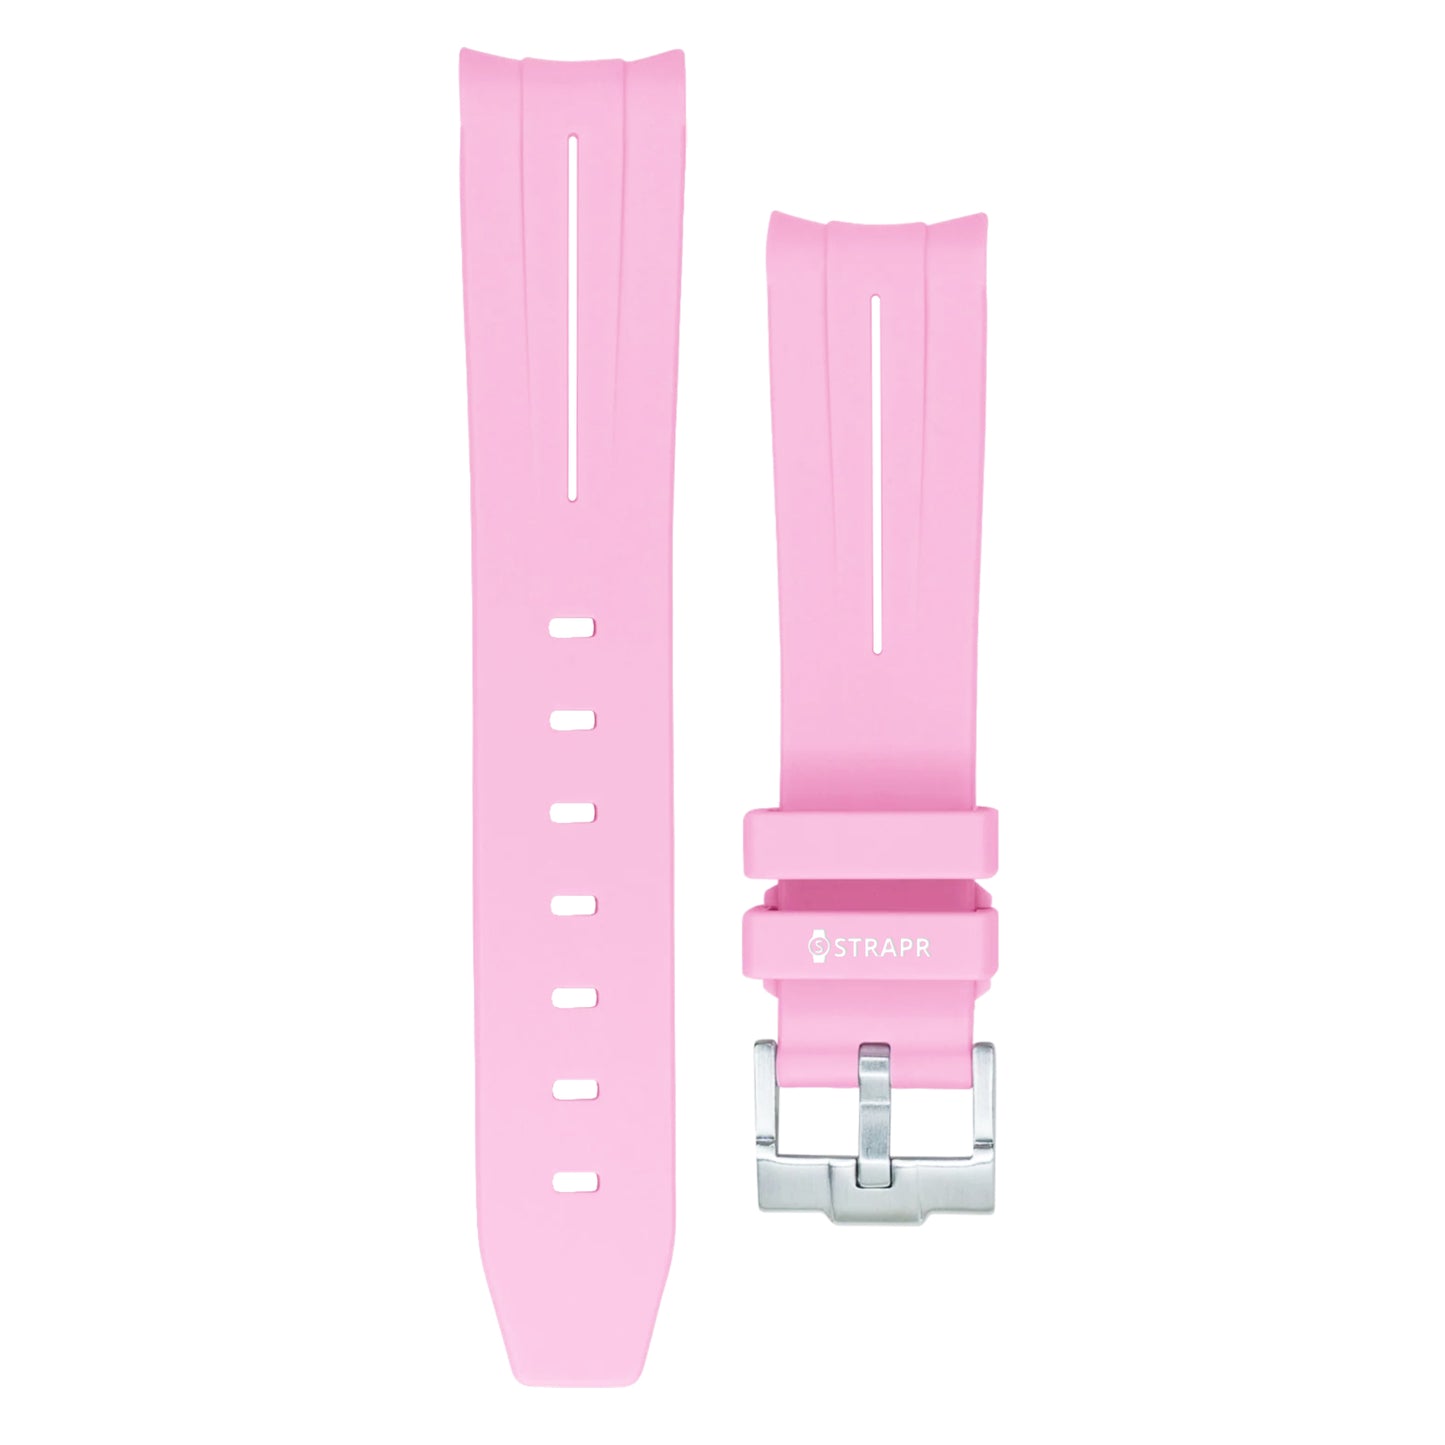 Omega Swatch MoonSwatch strap pink and white